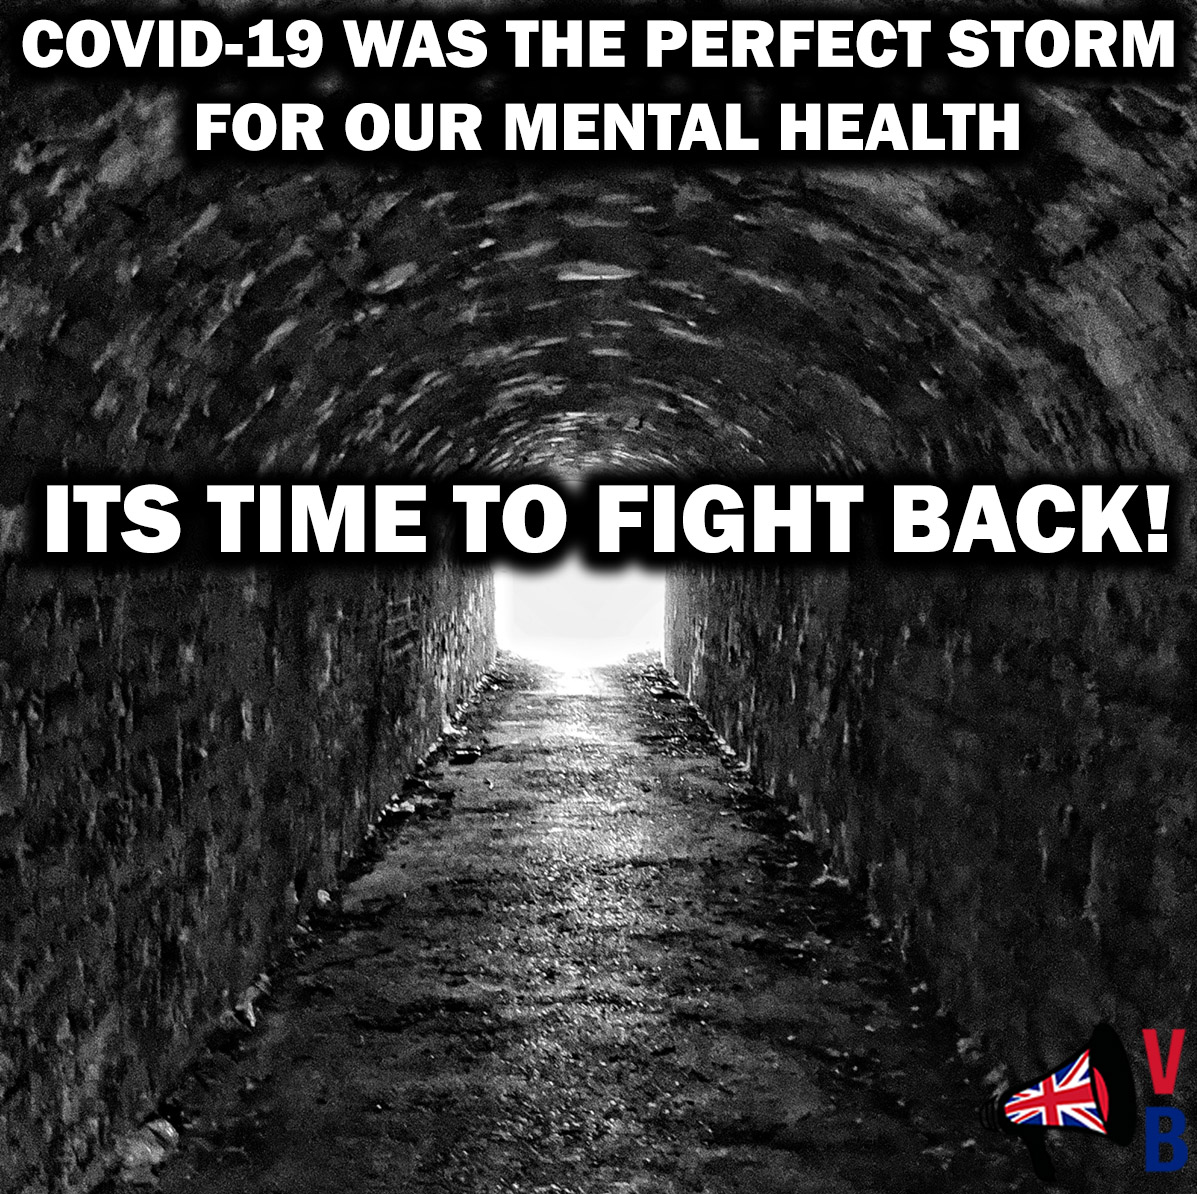 COVID19 WAS THE PERFECT STORM ITS TIME TO FIGHT BACK